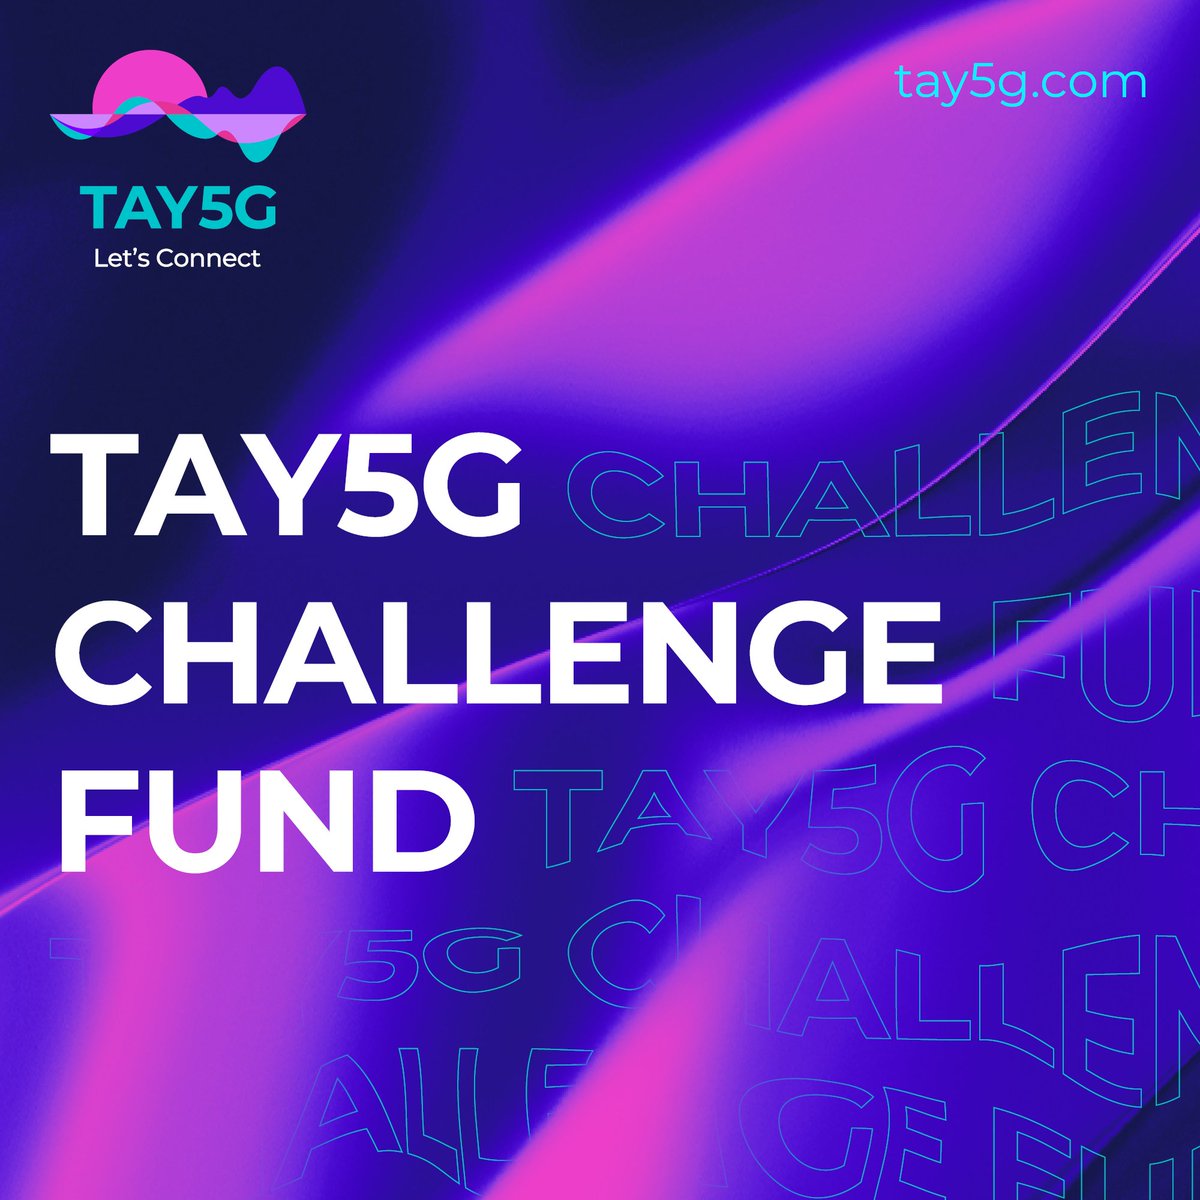 Calling all #UKBusiness trialing a product or service using #5G. 

The #Tay5G Challenge Fund is a #UKFundingOpportunity worth £450,000.

Competition open now. Closes 31st of January 2023.

More info: bit.ly/Tay5GChallenge

#5GConnectivity #5GForBusiness